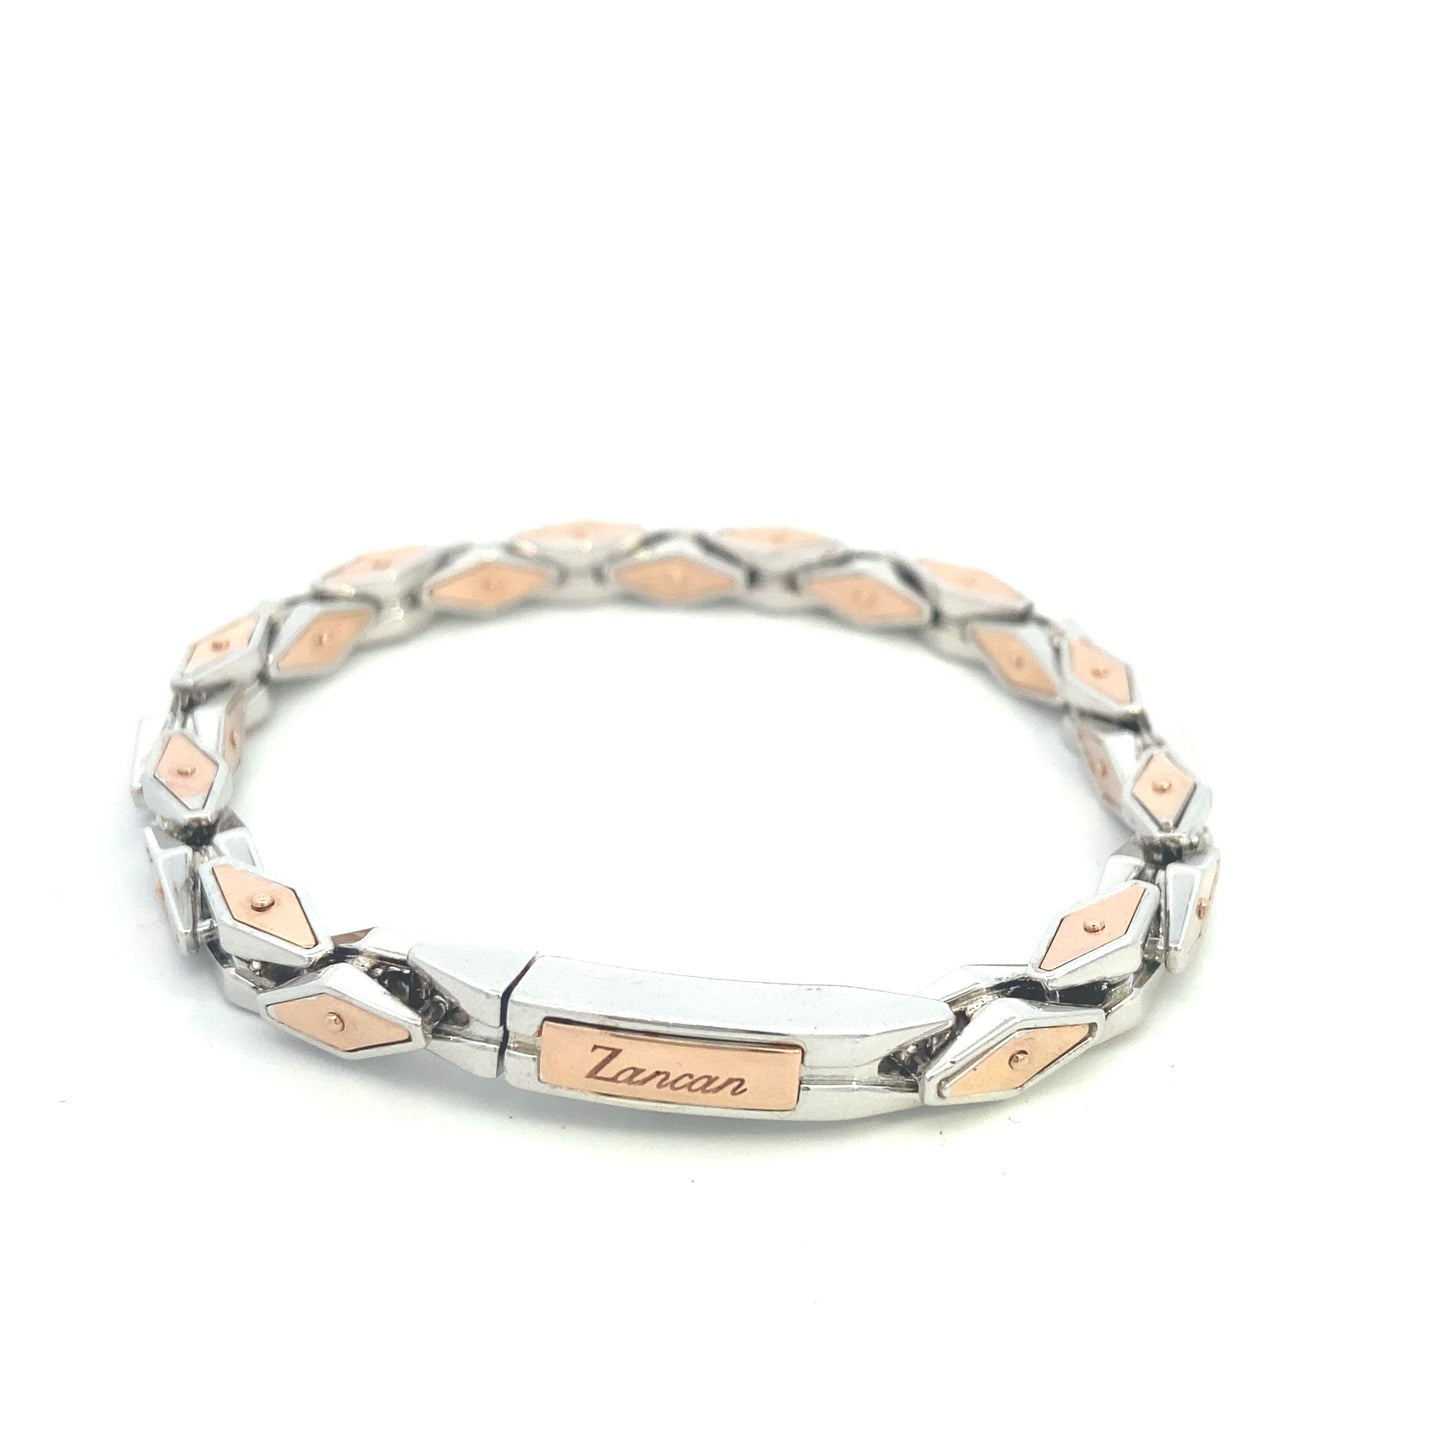 Dimond Style Silver and Rose Gold Bracelet | Zancan | Luby 